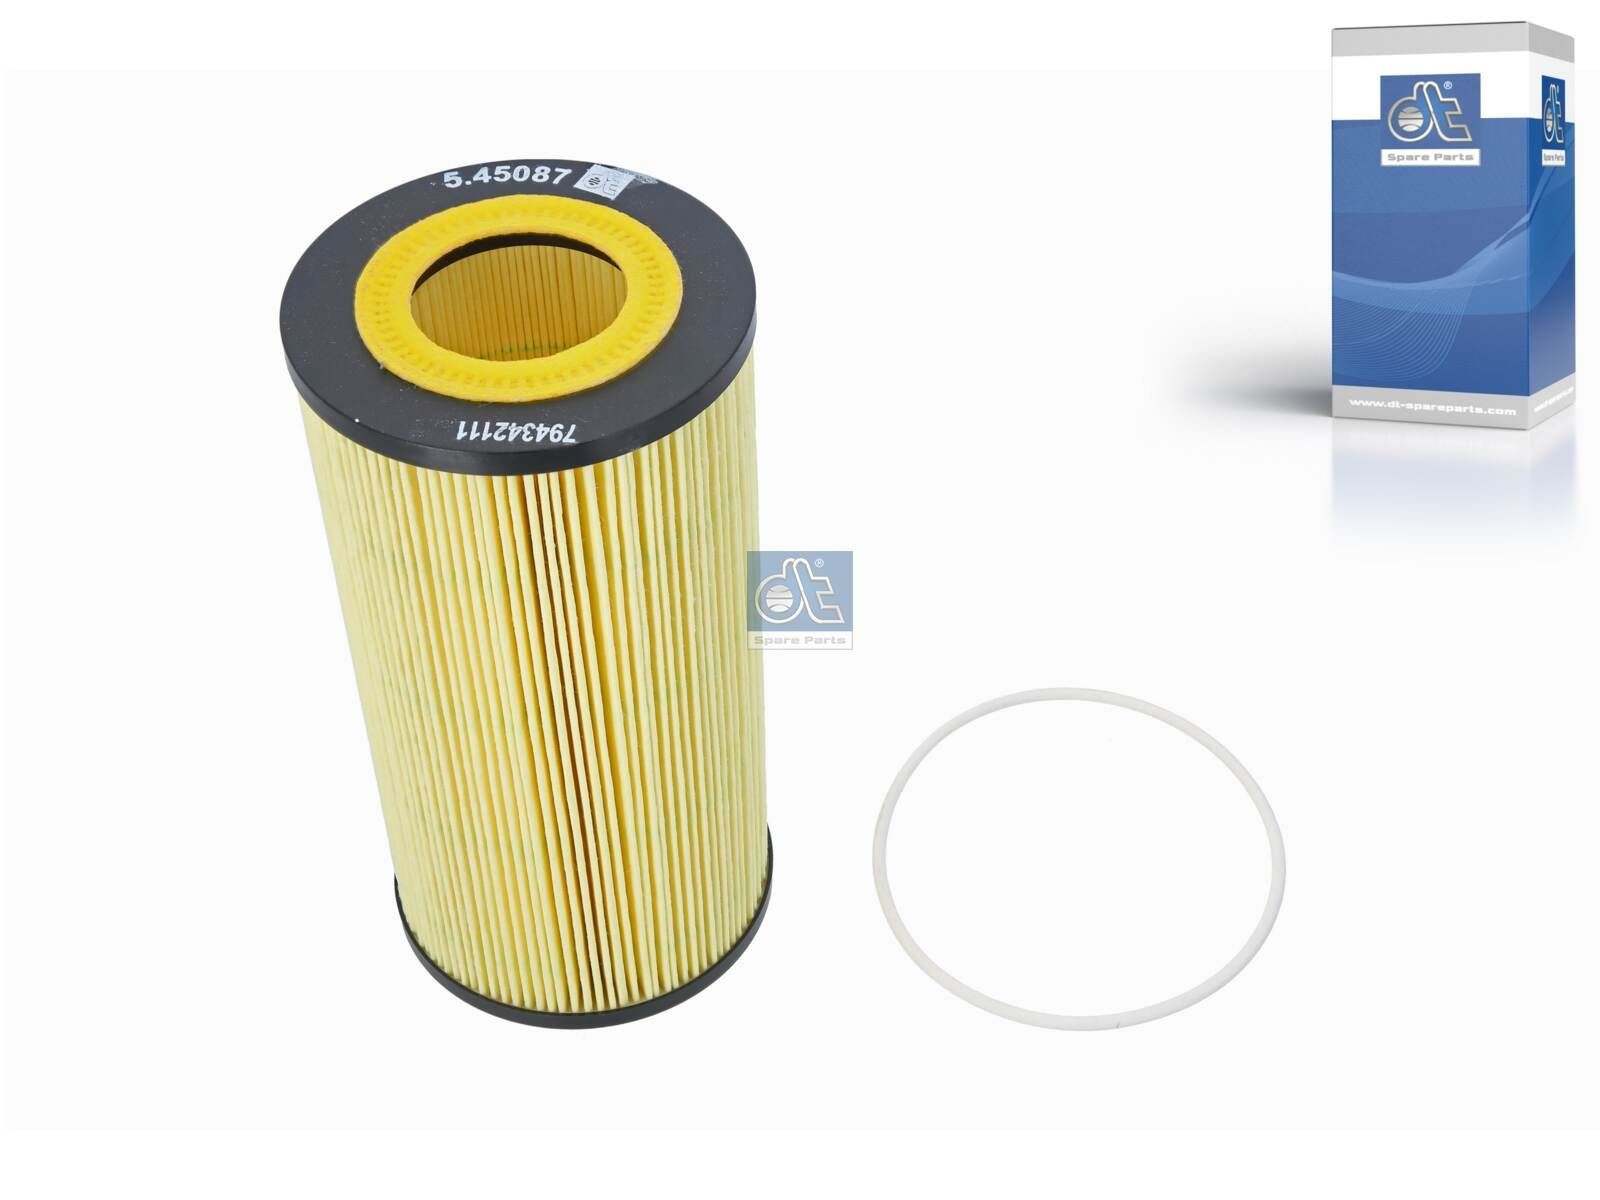 HU 12 103 x DT Spare Parts 5.45087 Oil filter 1537110